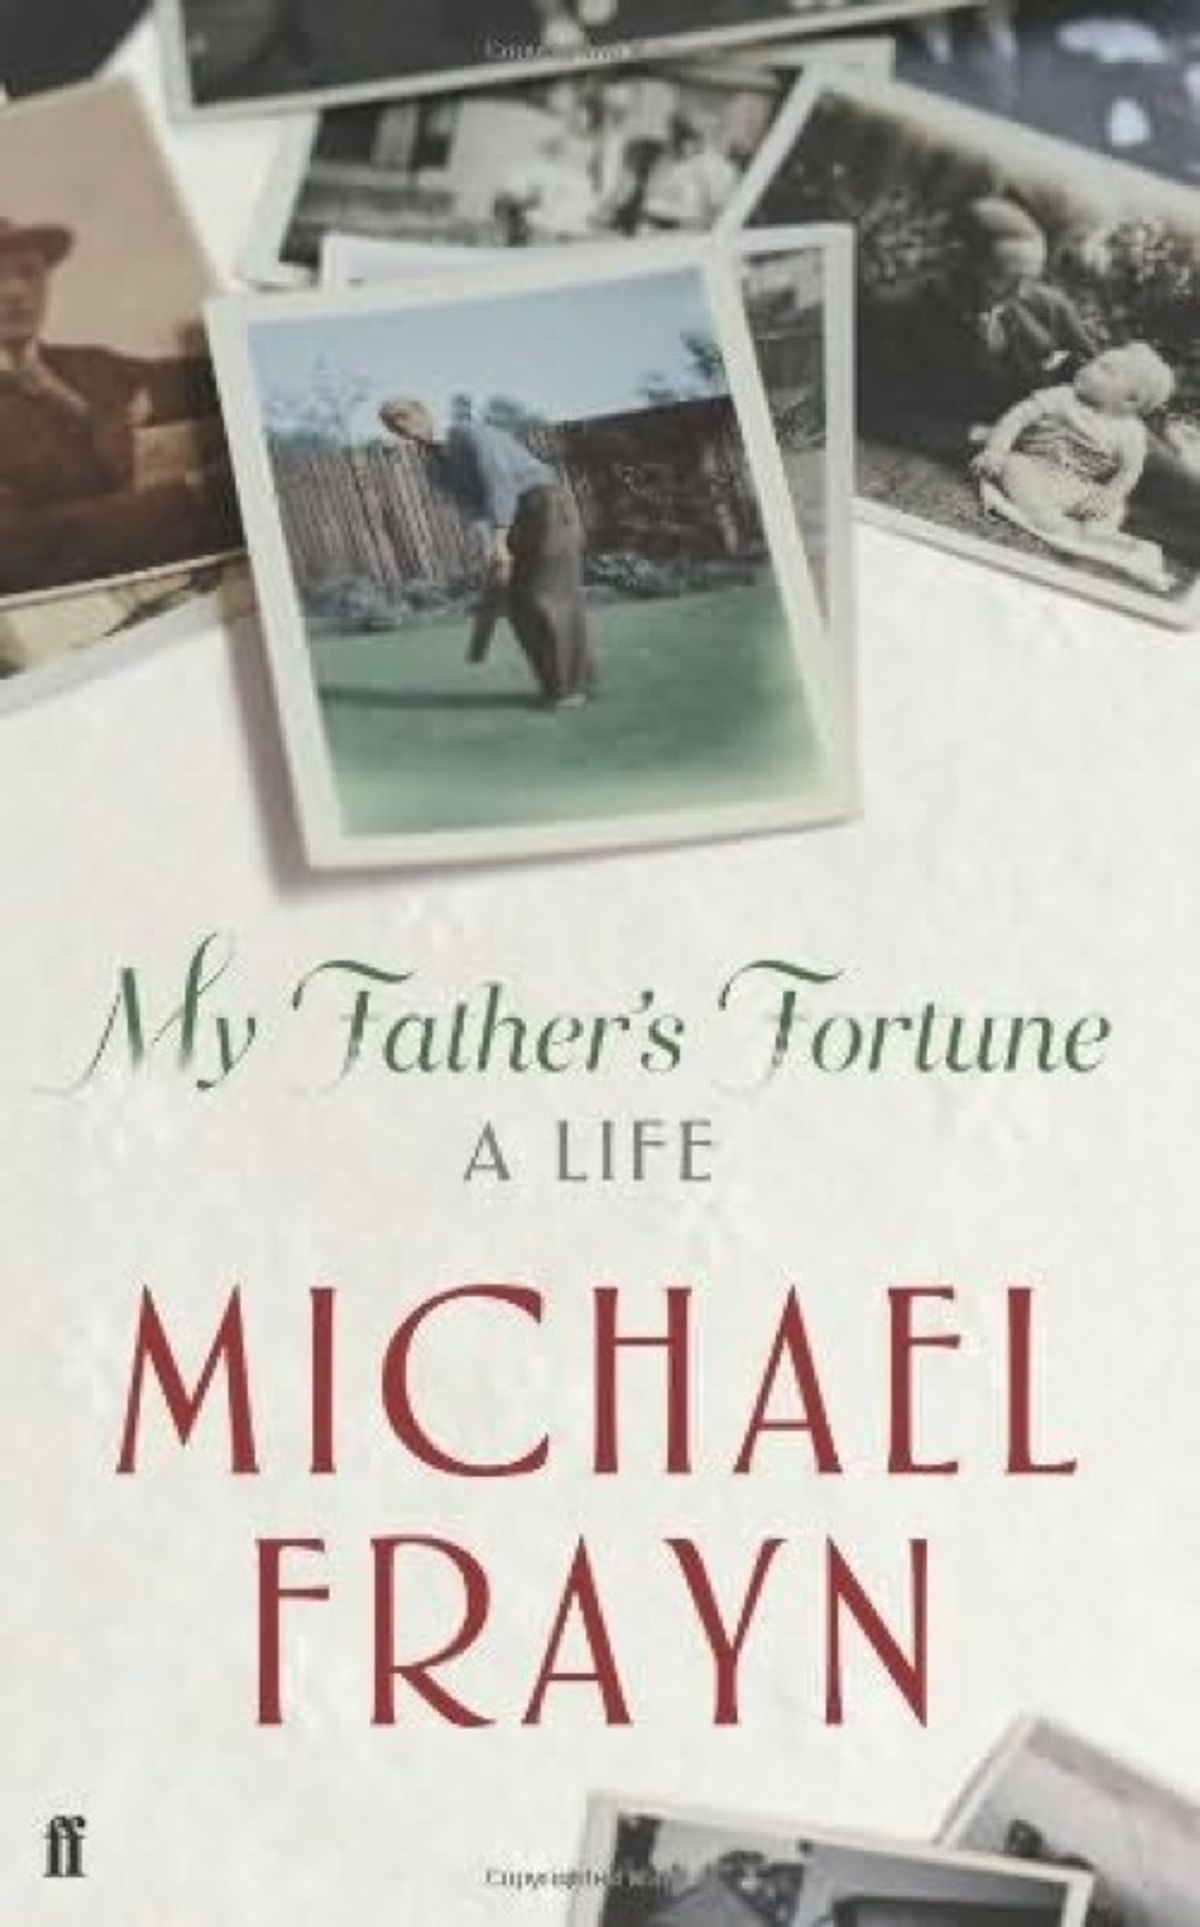 "My Father's Fortune" by Michael Frayn